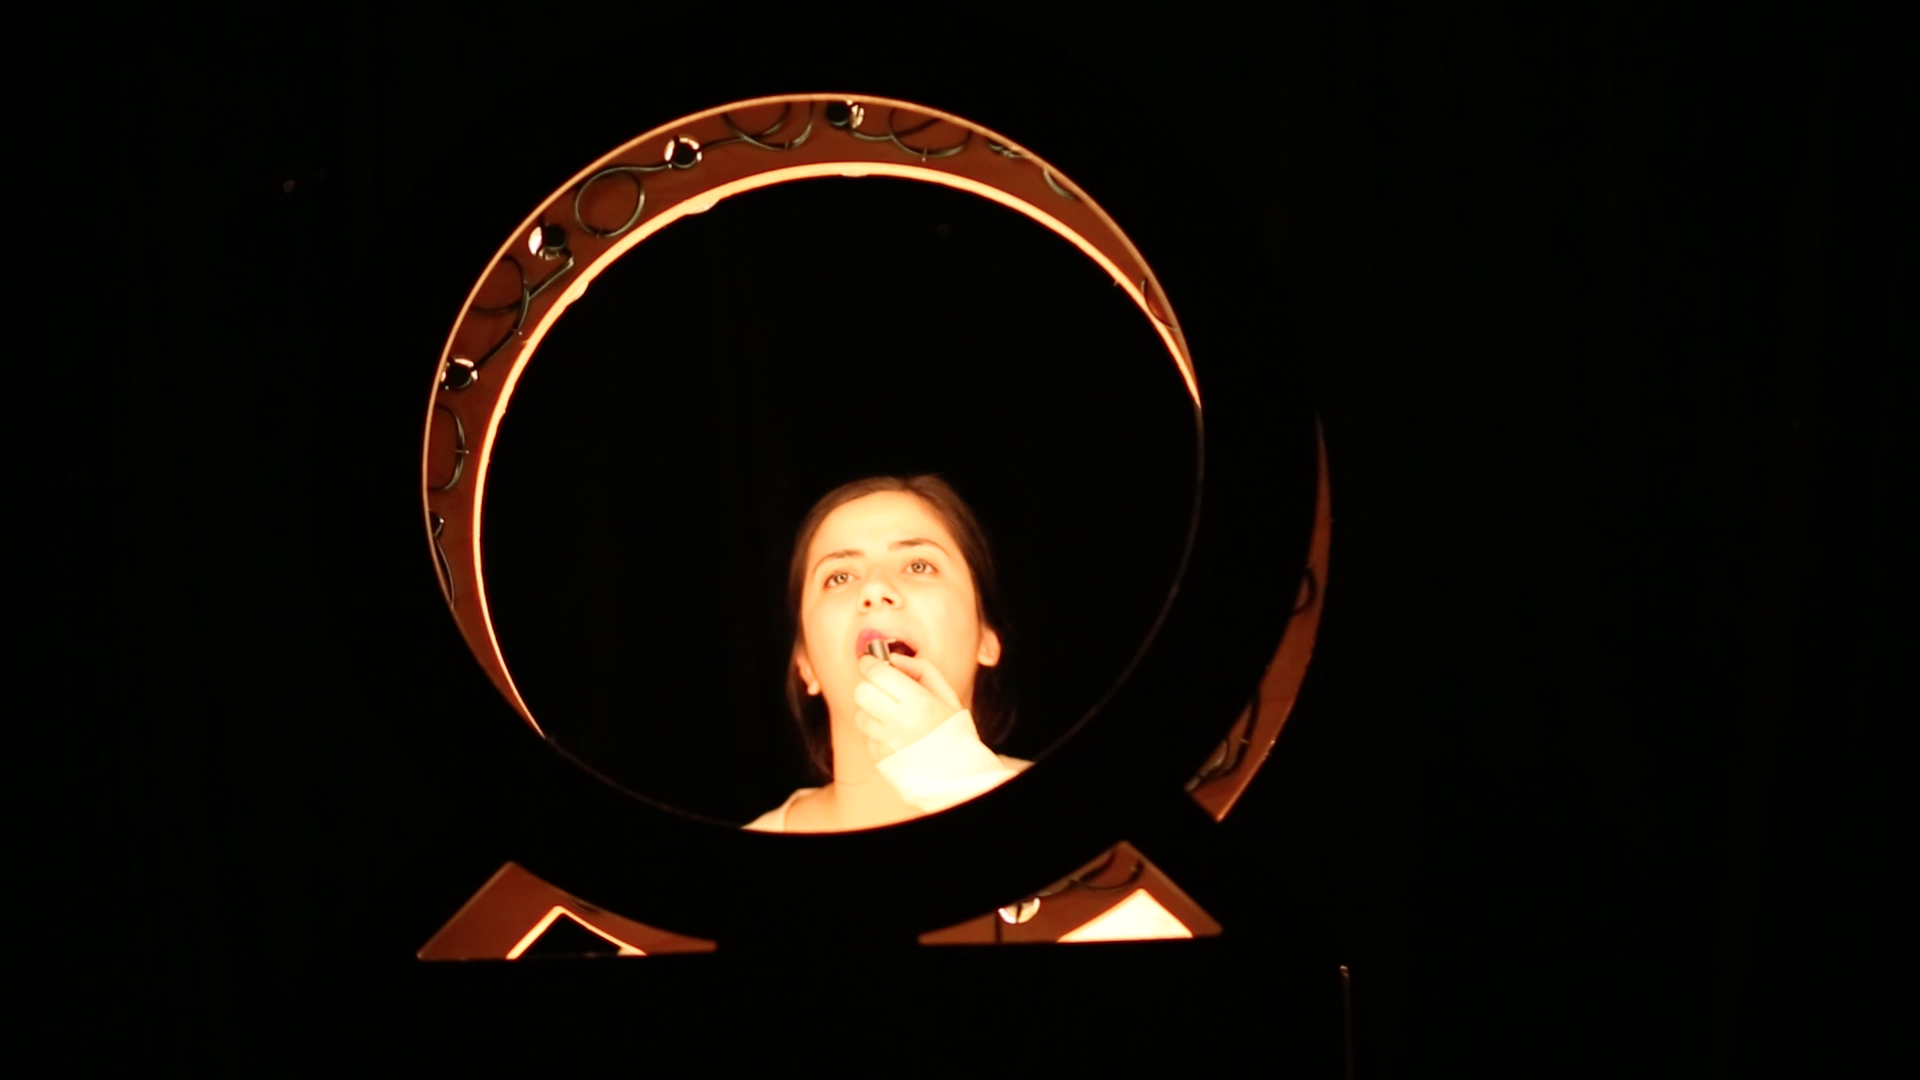 Photo of the perfomance. The background is black, the artist is behind a ring light that is illuminating her face and she is putting lipstick on.